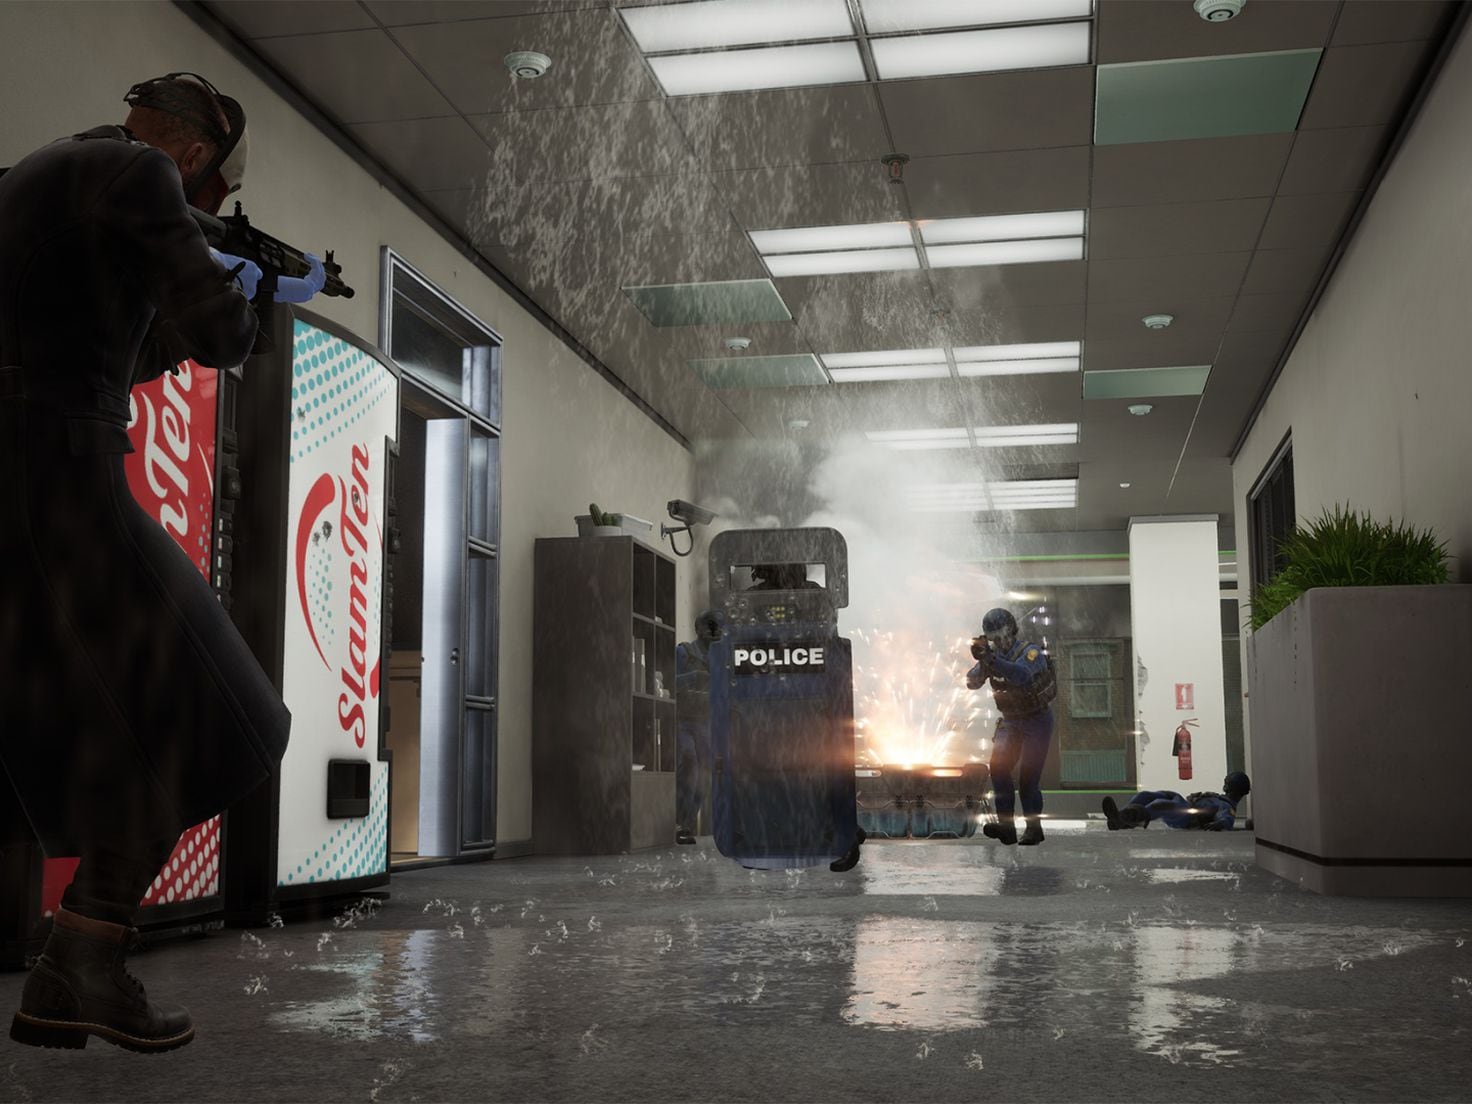 How to Check Payday 3 Server Status - Siliconera